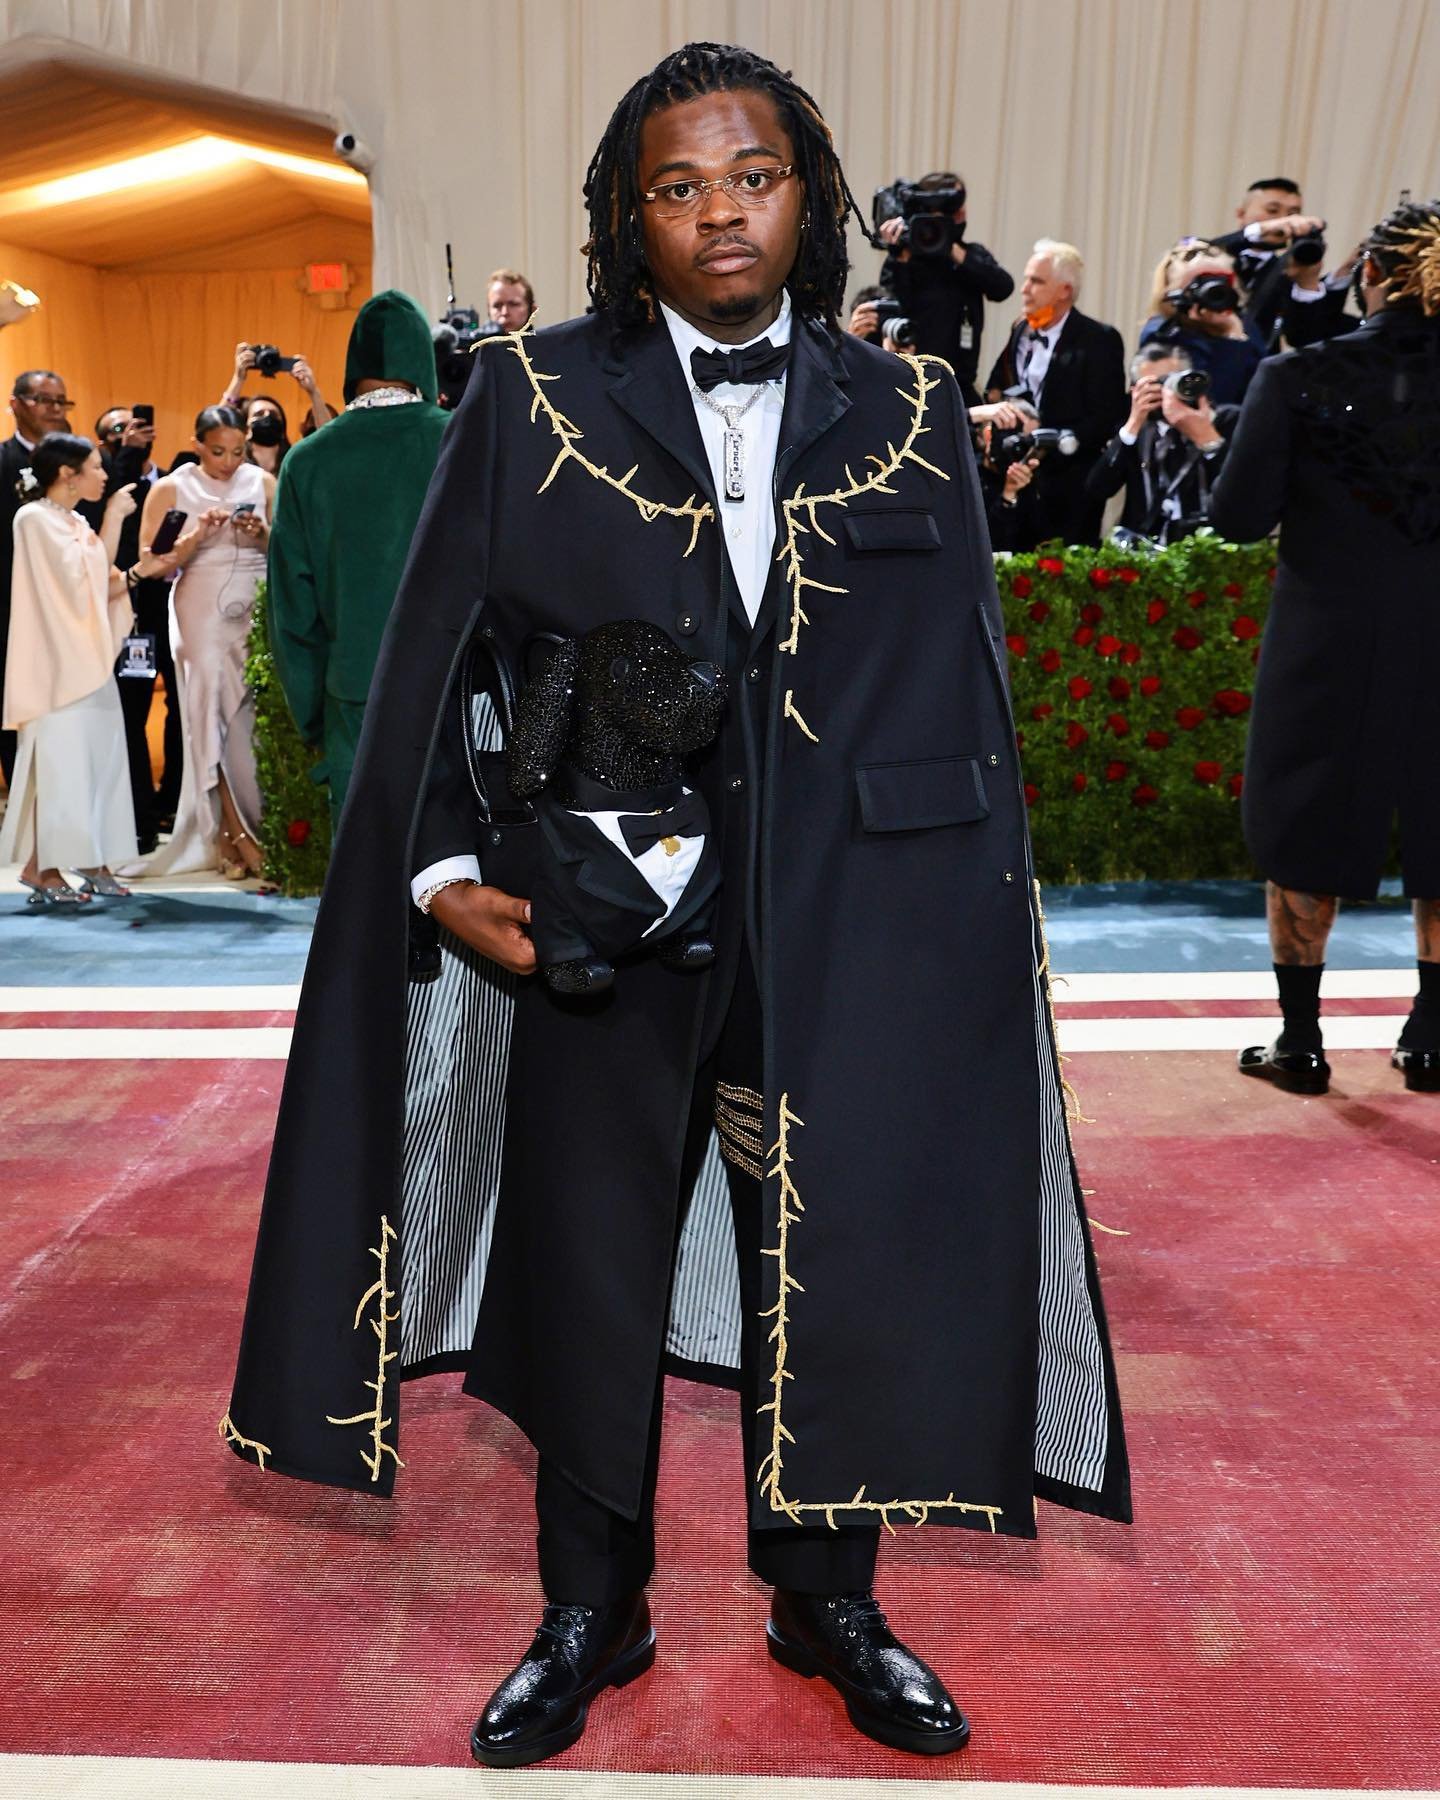 Gunna wears a long cape in 3-ply mohair with gold bullion and beaded thorns embroidery over a suit in 3-ply mohair with gold 4-bar embroidery.